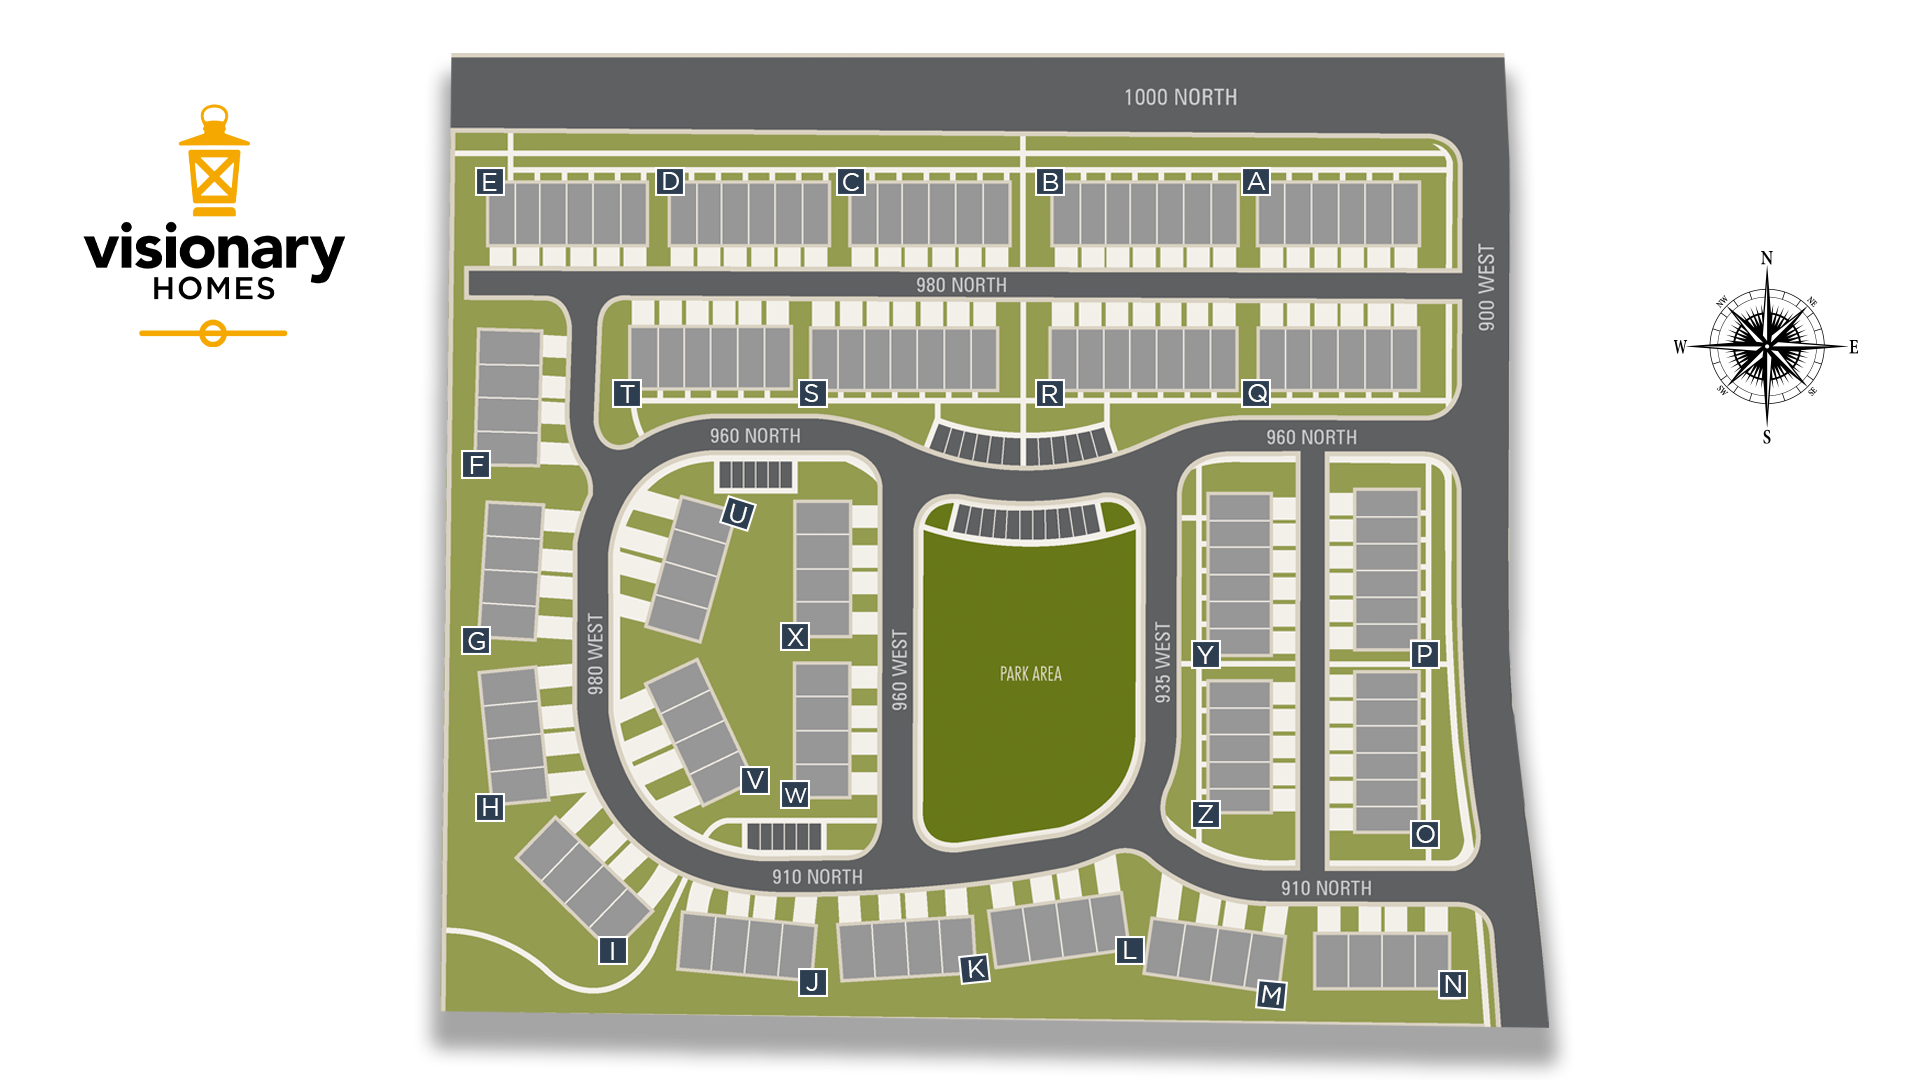 Tremonton, UT Archibald Estates - Townhomes New Homes from Visionary Homes